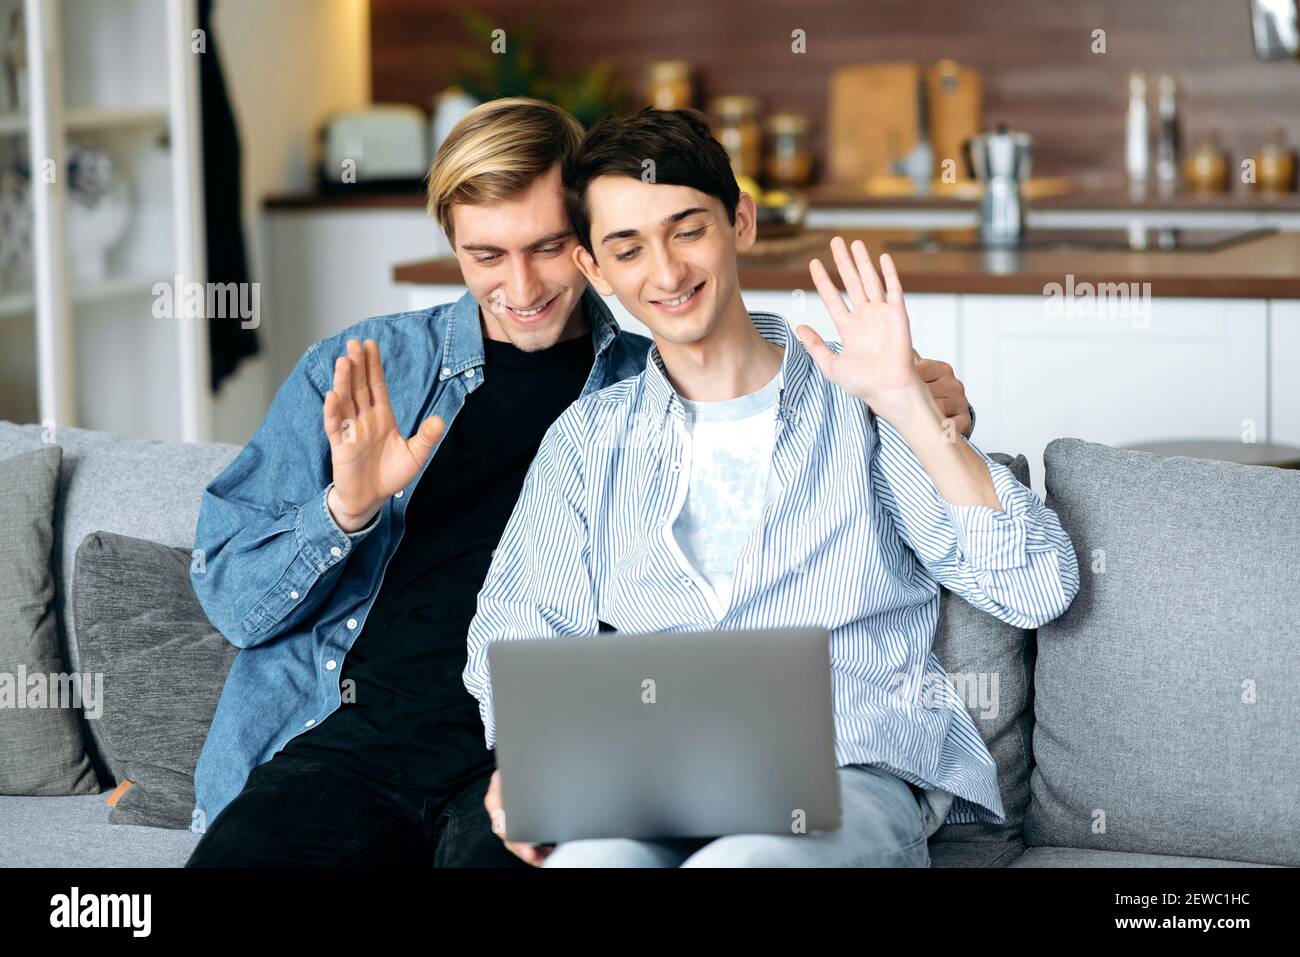 homosexual-couple-online-communication-gay-couple-relax-on-the-couch-in-the-living-room-use-a-laptop-they-chatting-with-friends-by-video-call-smiling-waving-hands-greeting-2EWC1HC.jpg